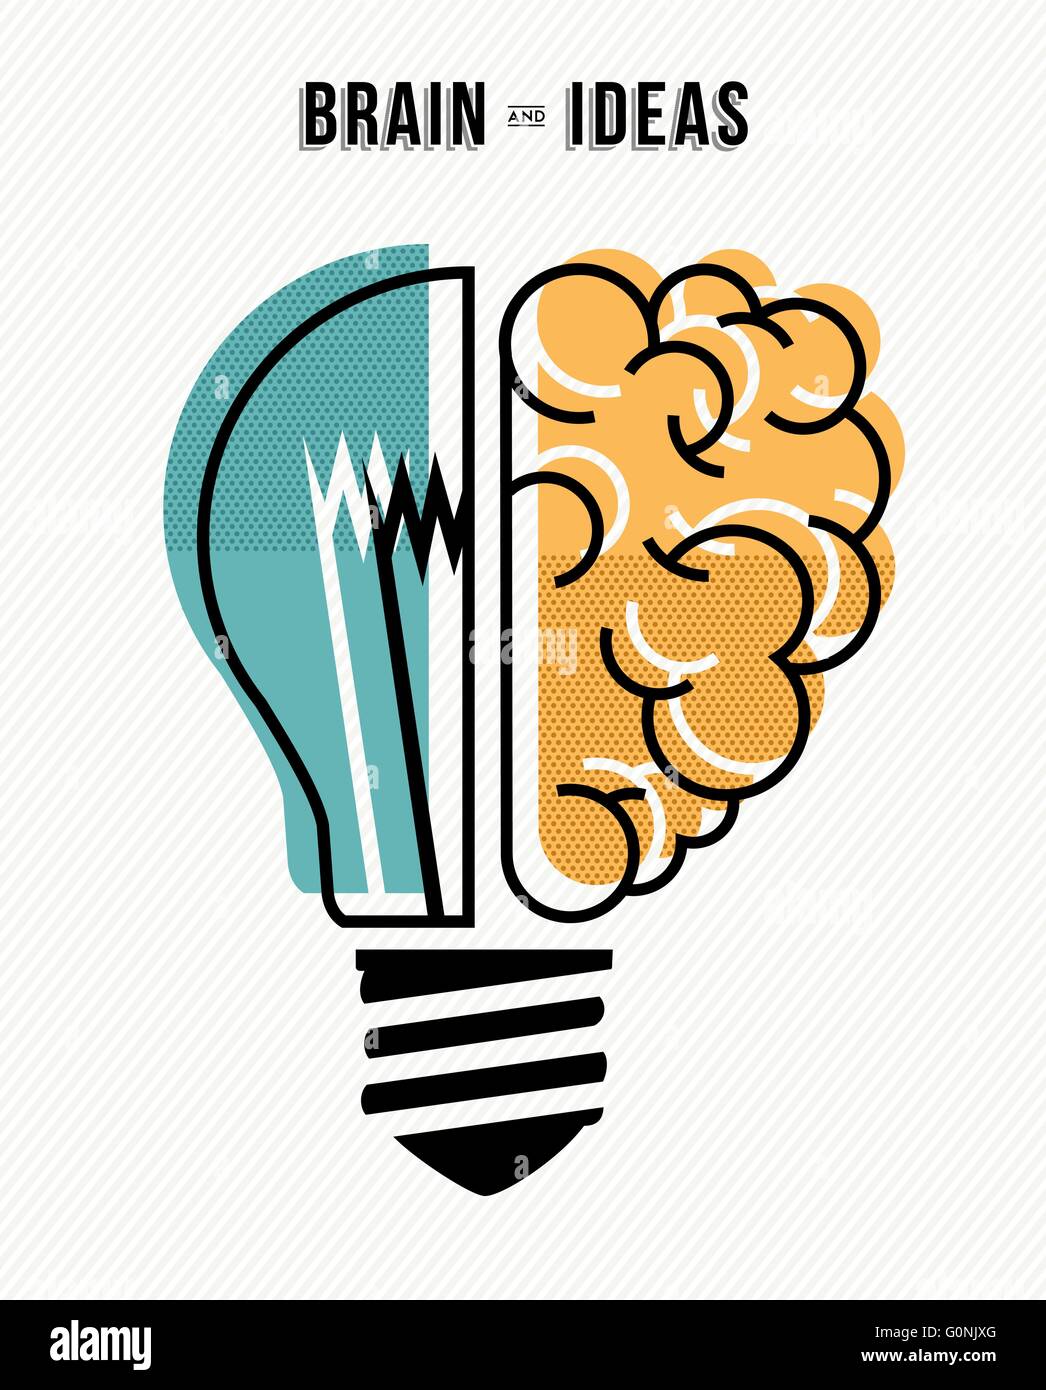 Brain and ideas, innovation at work business concept design in flat line art modern illustration. EPS10 vector. Stock Vector